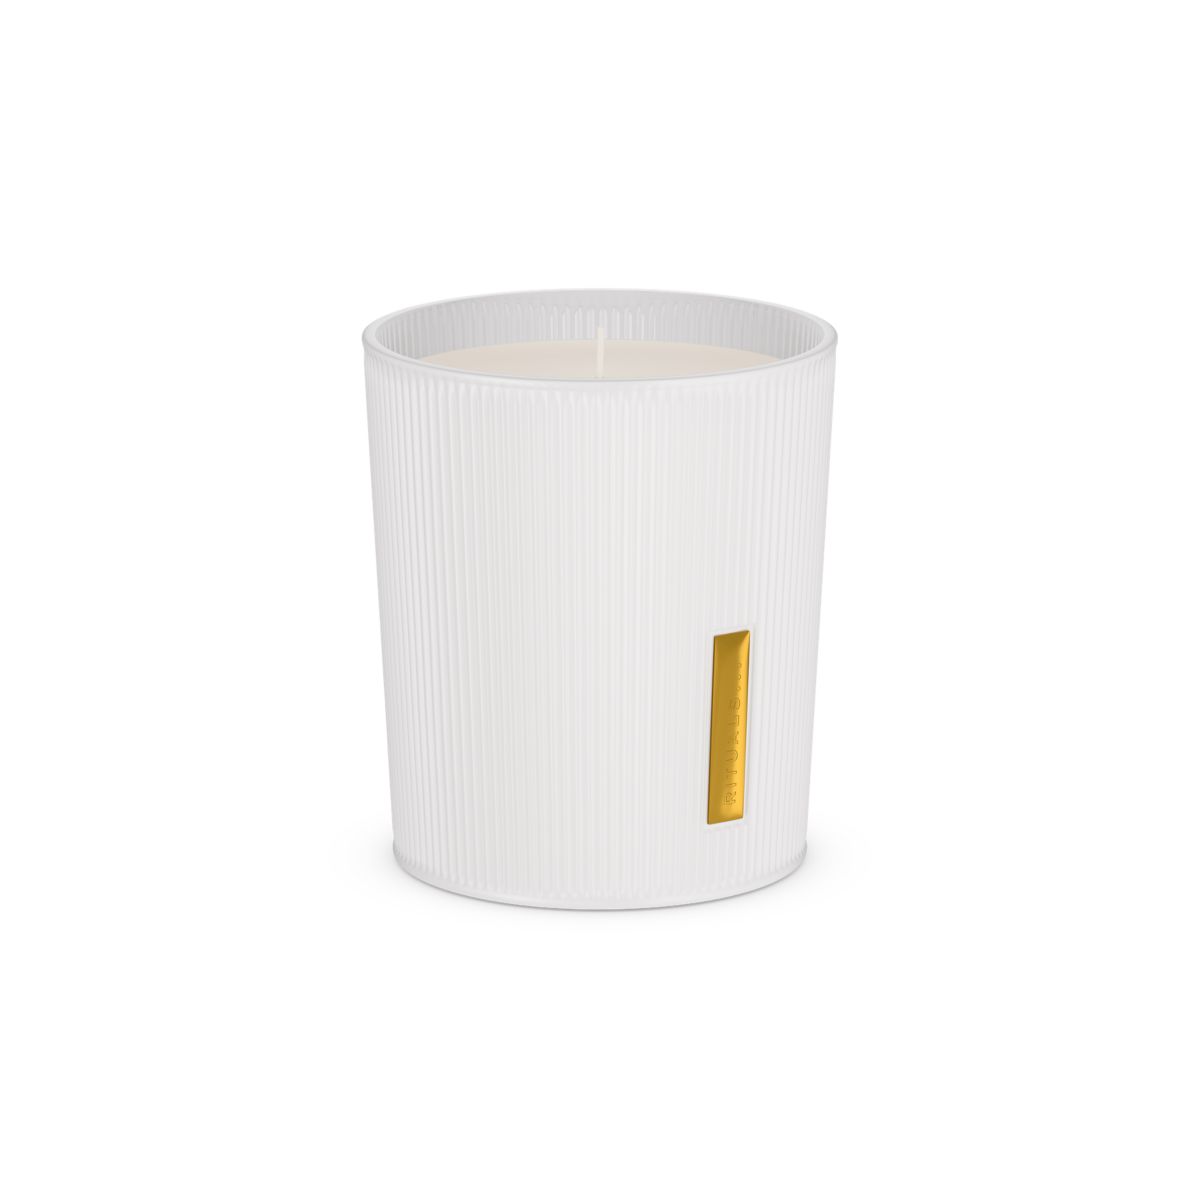 Rituals Karma Scented Candle - The Ritual of Karma Scented Candle